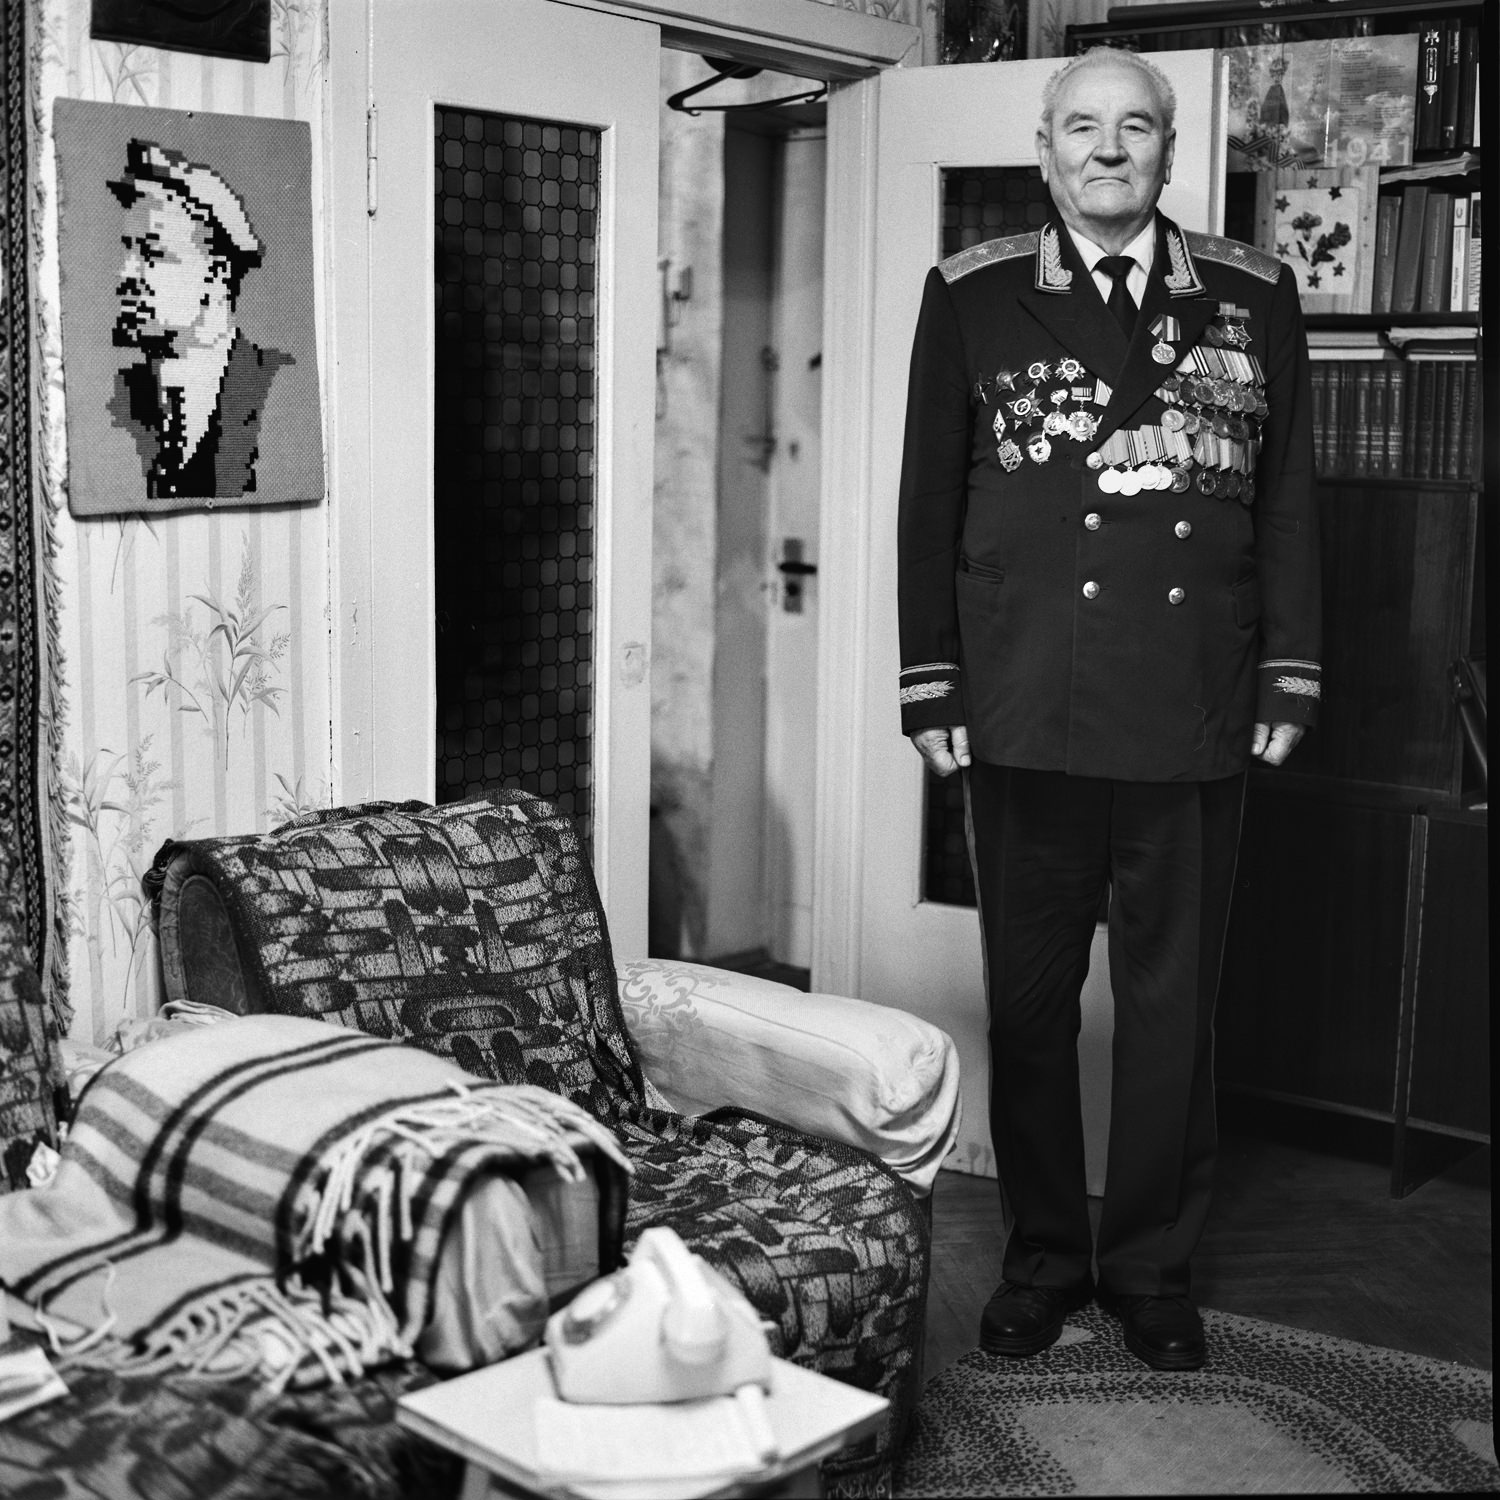 Portrait of the Great Patriotic War veteran in unifrm with medals standing still in his room with hand-made picture of Lenin on wall